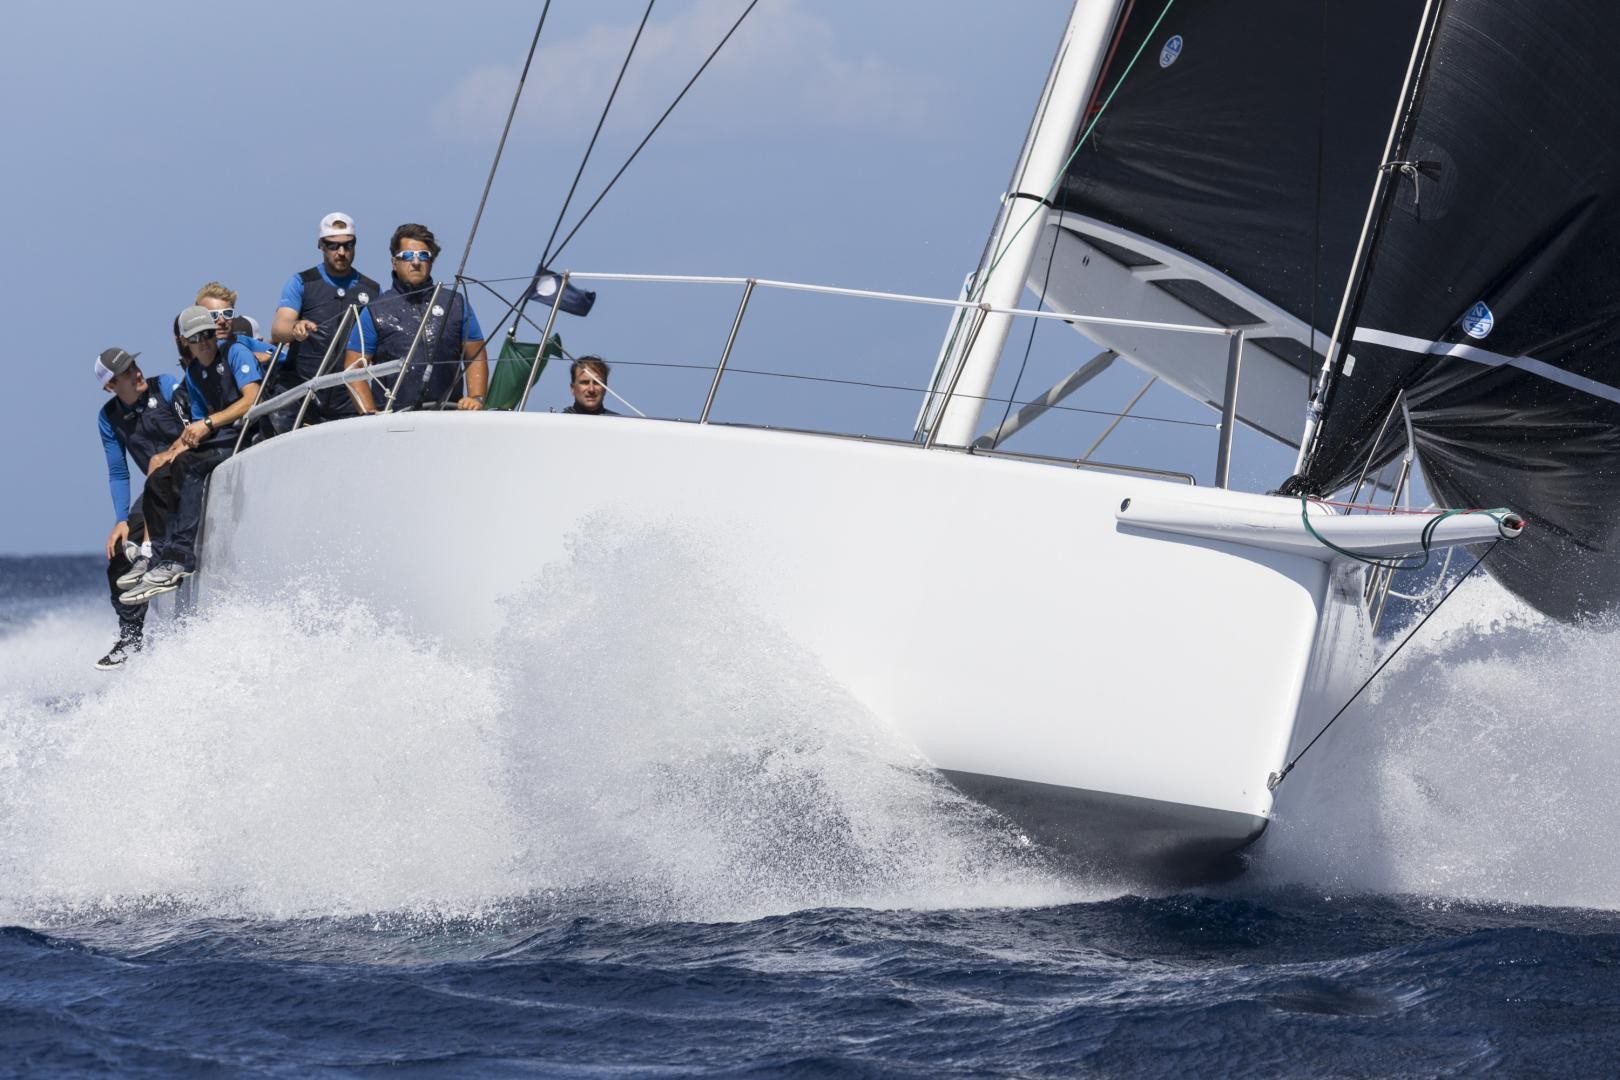 Peter Dubens' Spectre racing last year. This year her pro crew will be short-handed